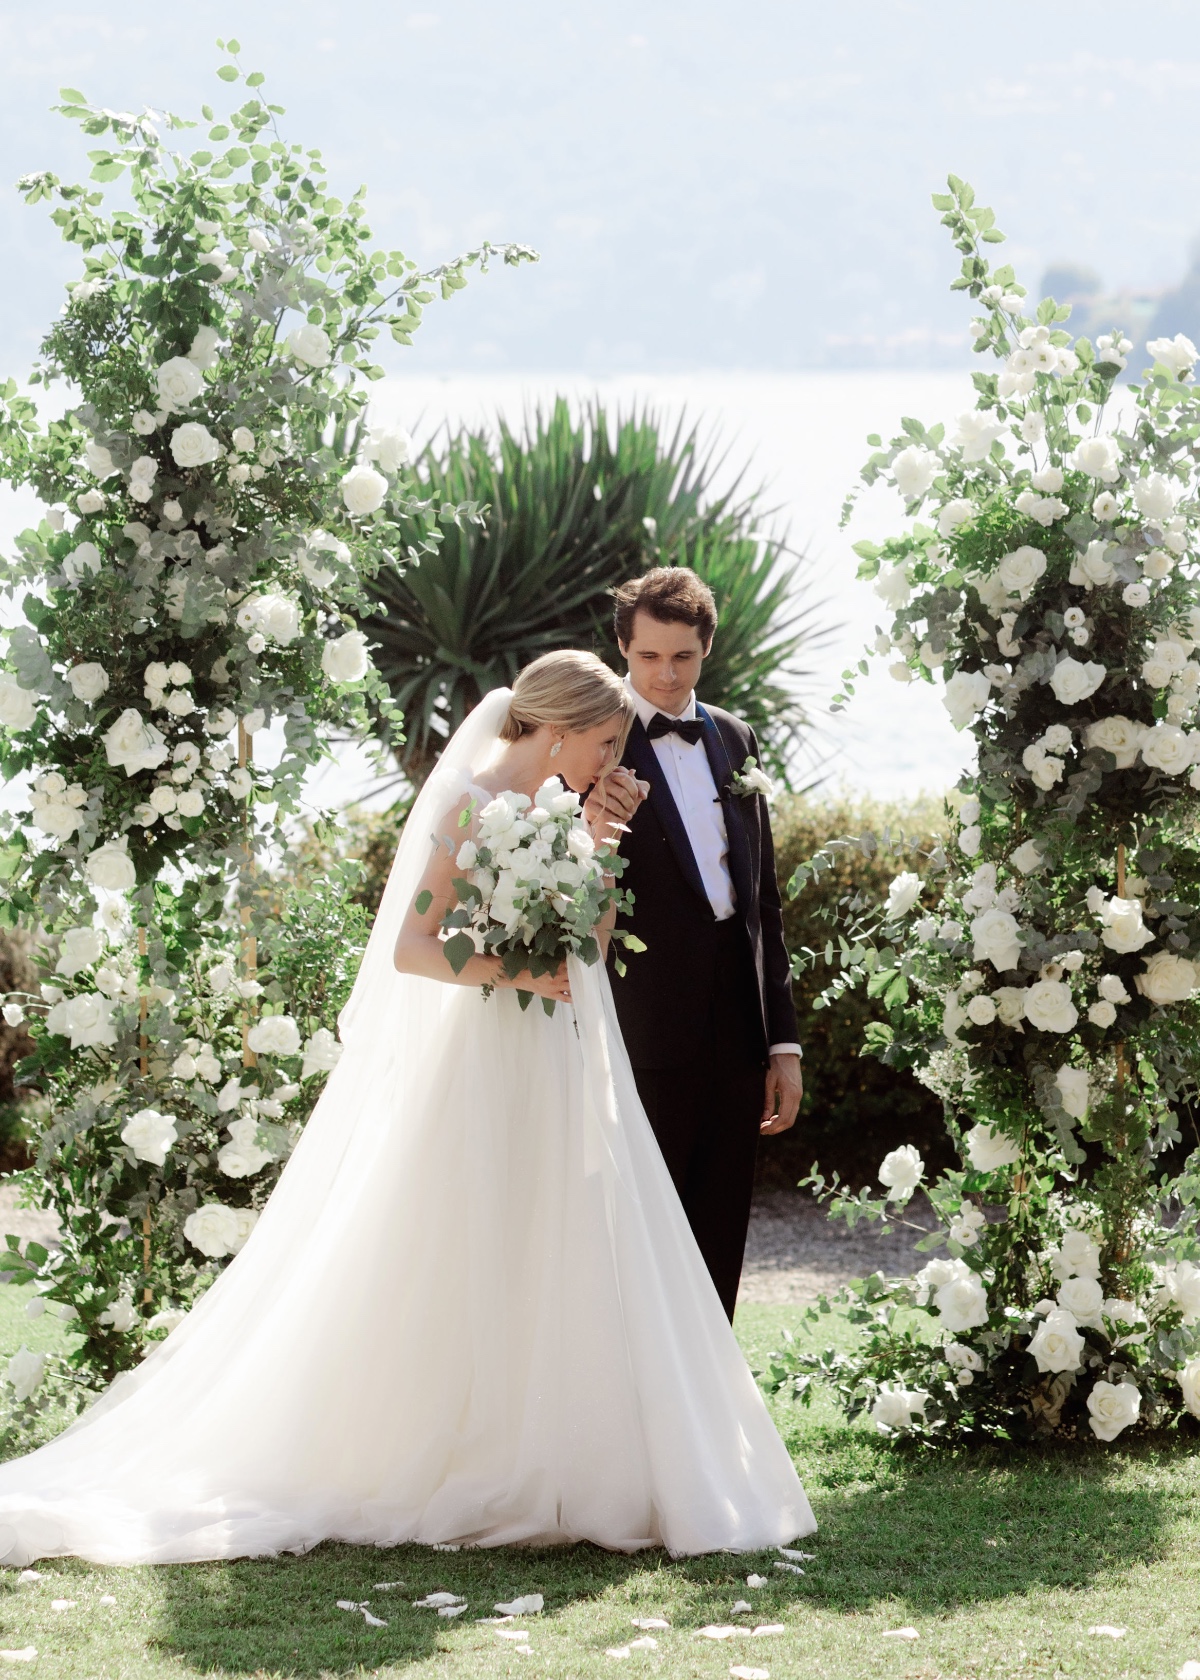 Chic bride and groom at floral wedding